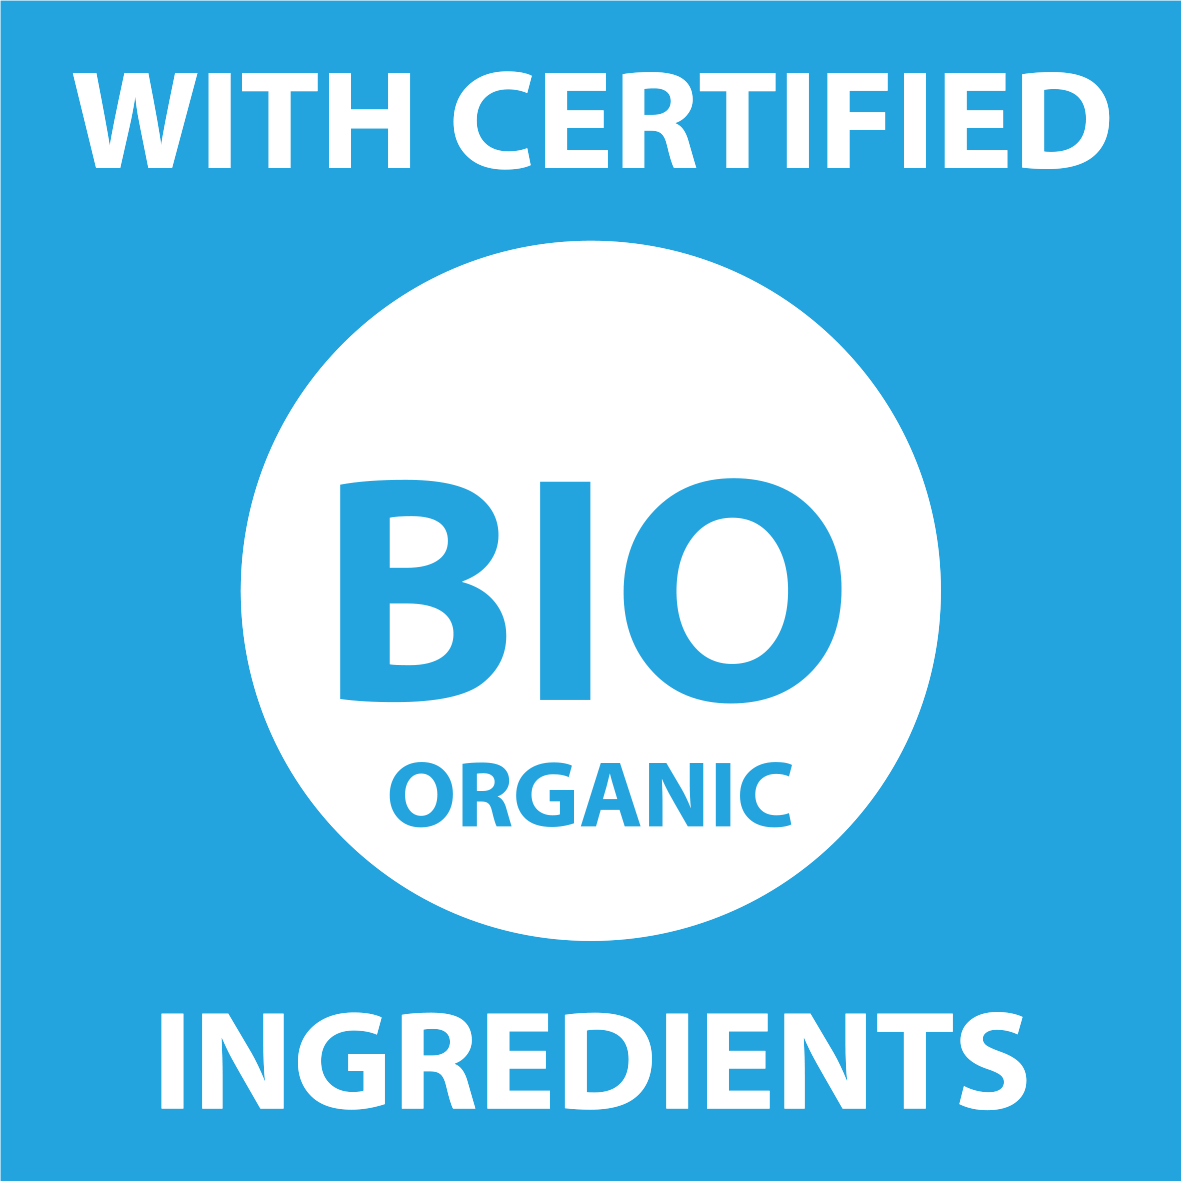 With certified bio/organic ingredients